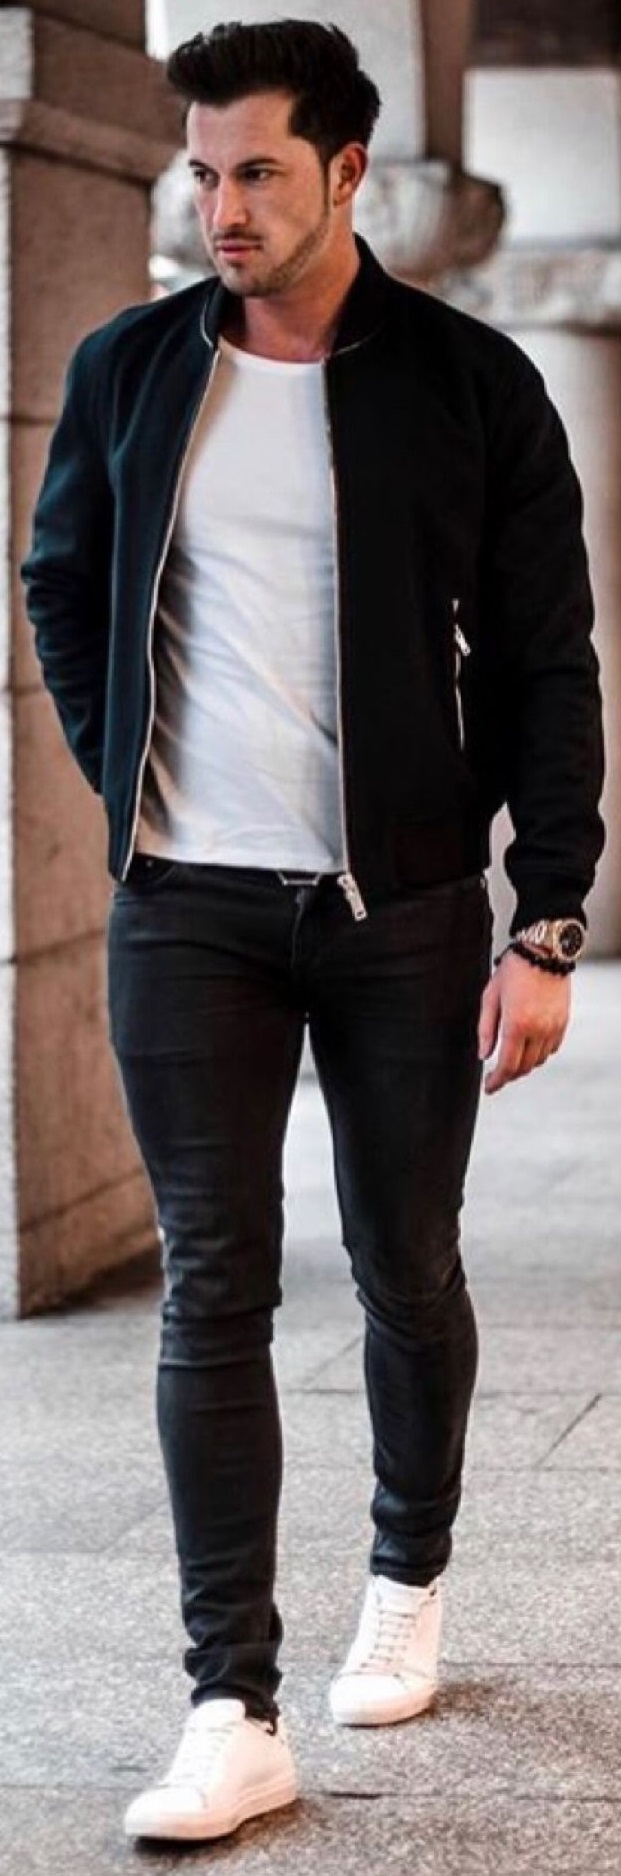 black zipped jackets with black chinos and white t-shirt and shoes